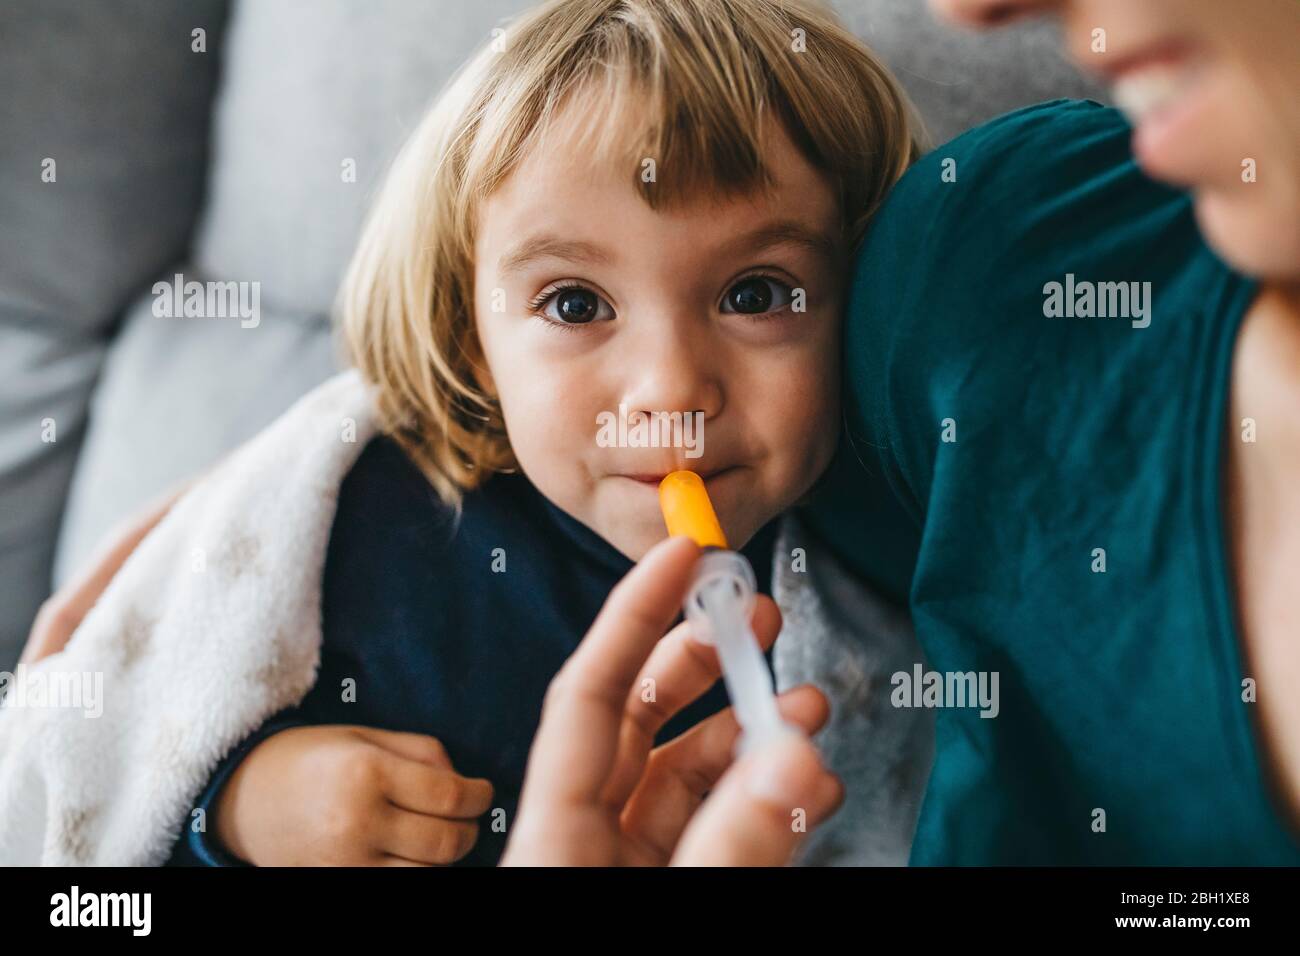 Portrait of sick little girl sitting on couch while mother giving her medication Stock Photo